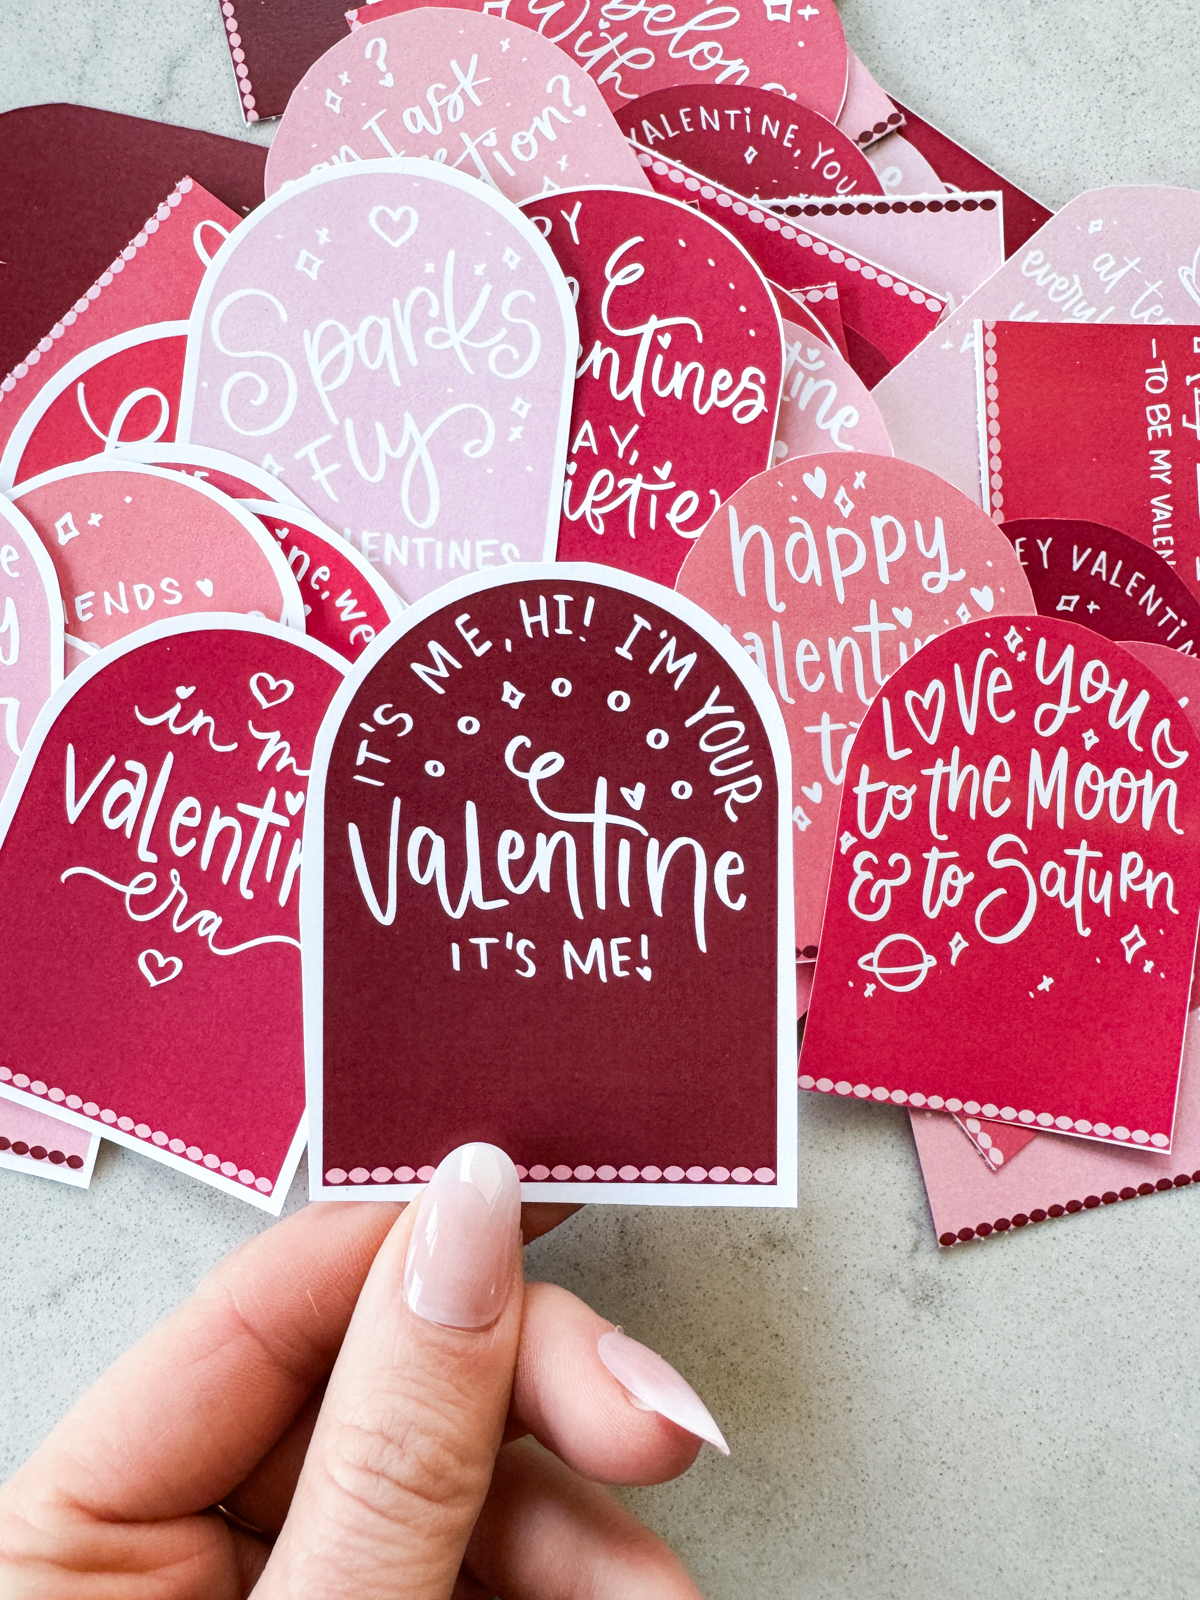 taylor swift themed valentines day cards printed and cut to size (arch shaped pink and deep burgundy color with white hand lettered song lyrics) shown on marble countertop. held valentine reads: it's me, hi! i'm your valentine, it's me!